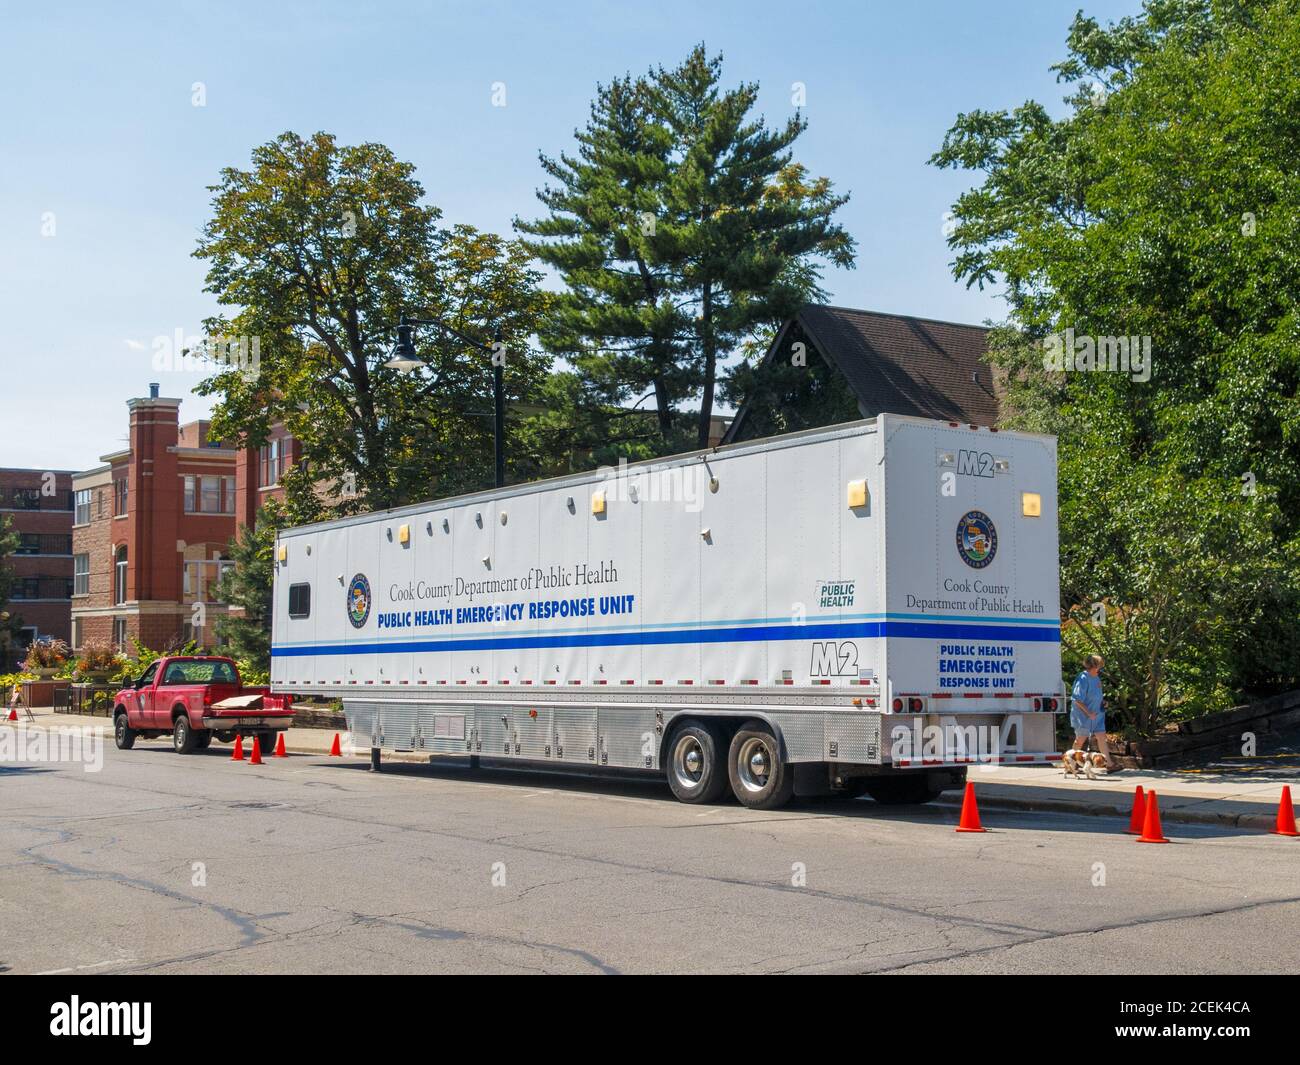 Cook County Department of Public Health Emergency Response Unit. Stock Photo